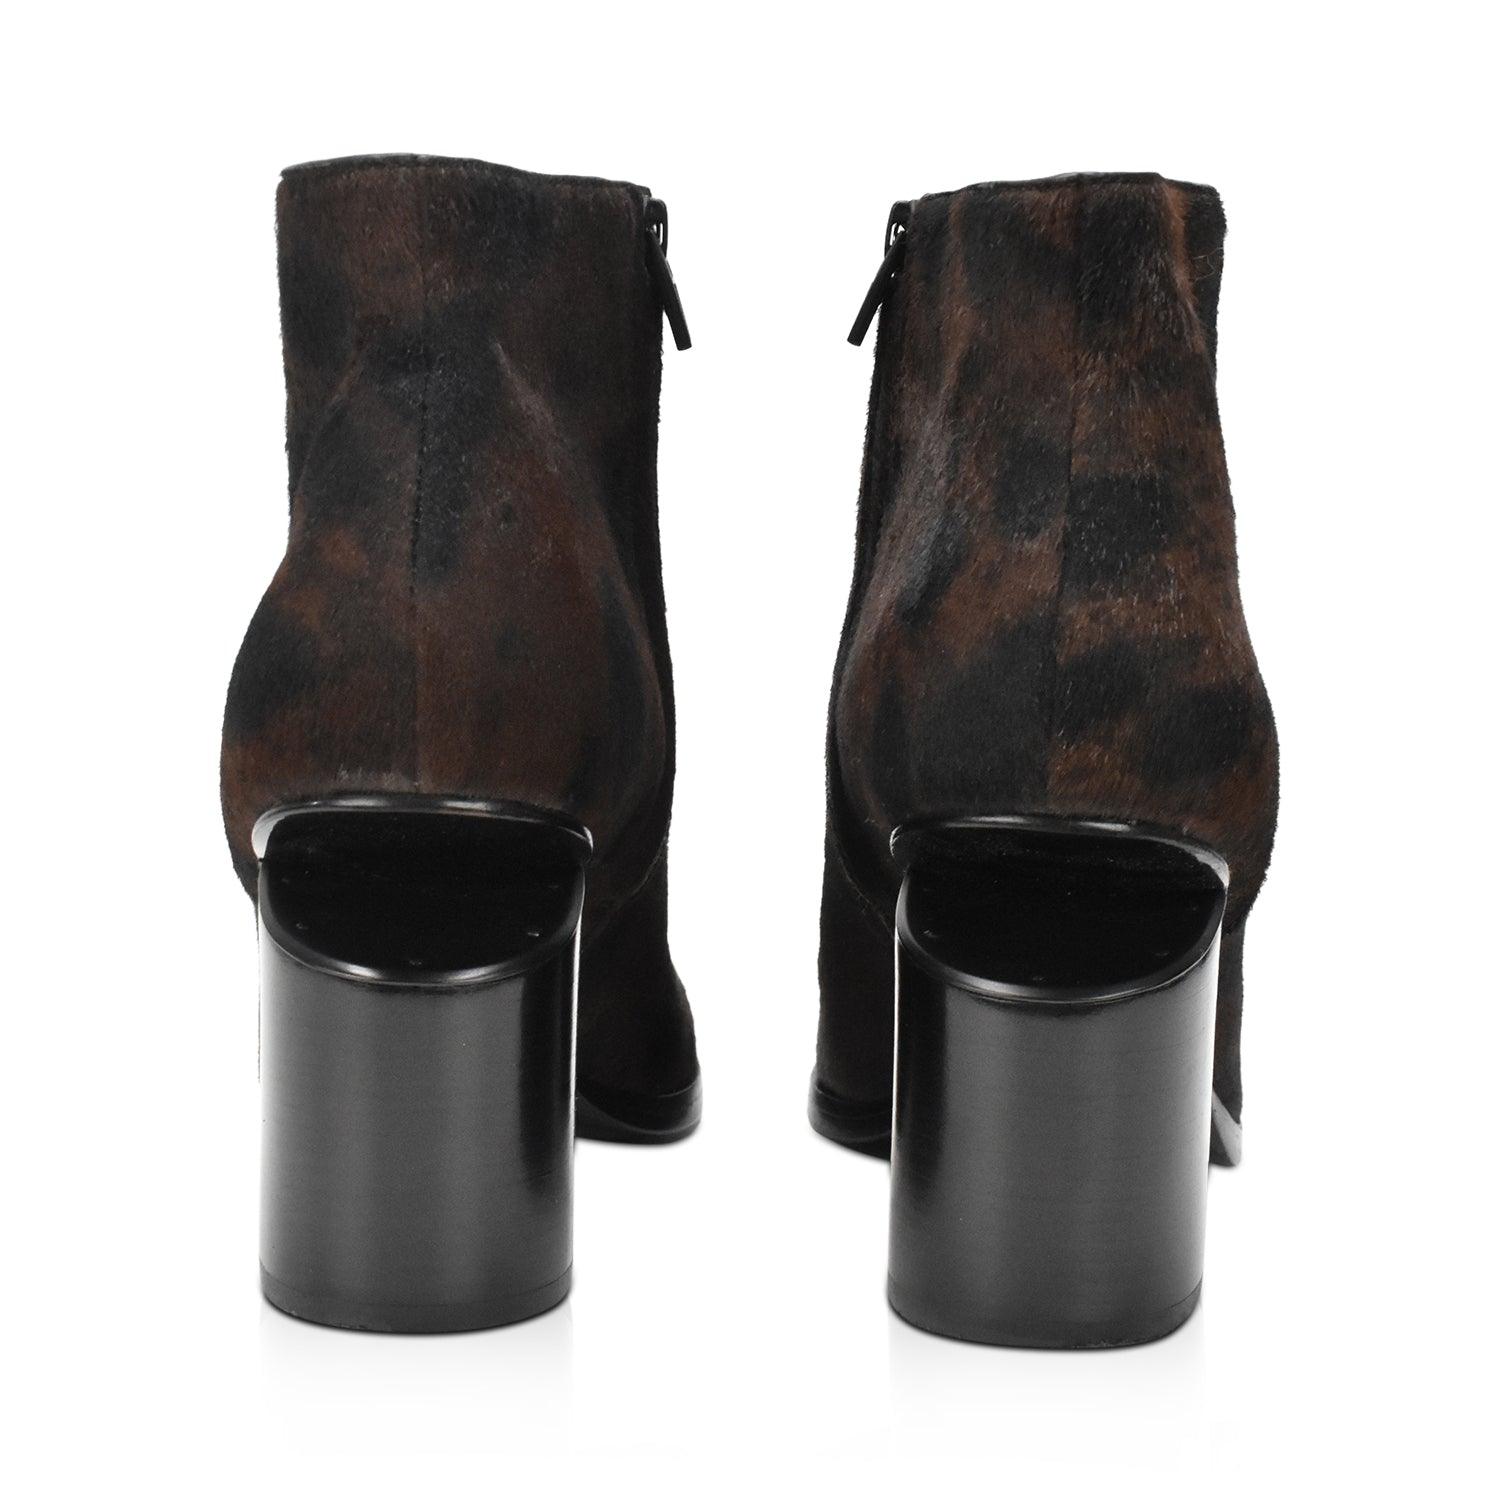 Alexander Wang Ankle Boots - Women's 38 - Fashionably Yours